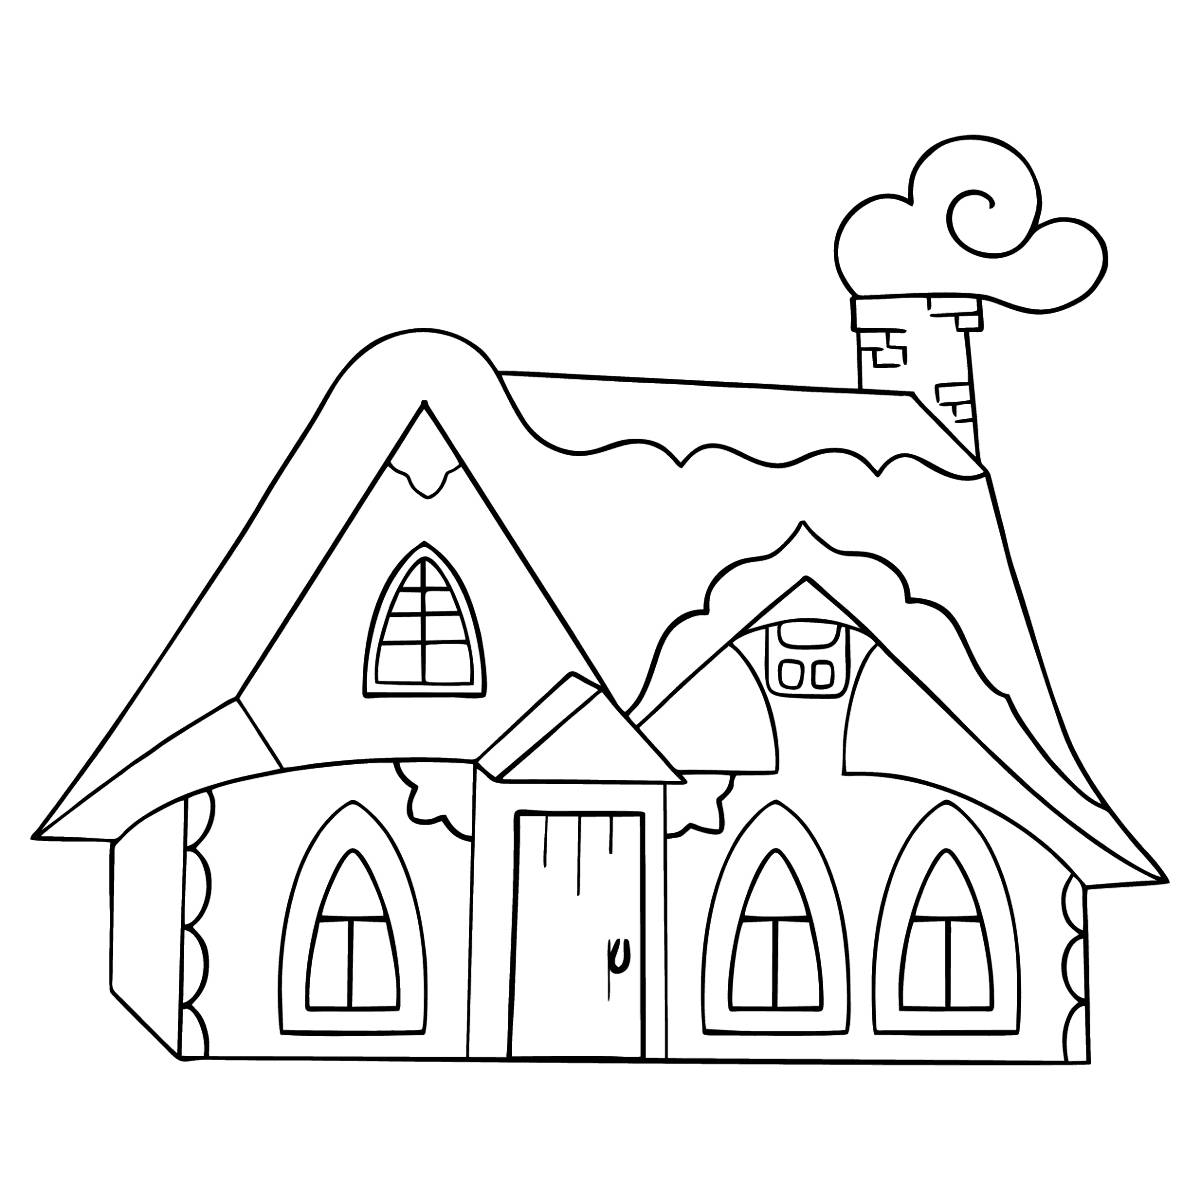 Living hut coloring for kids